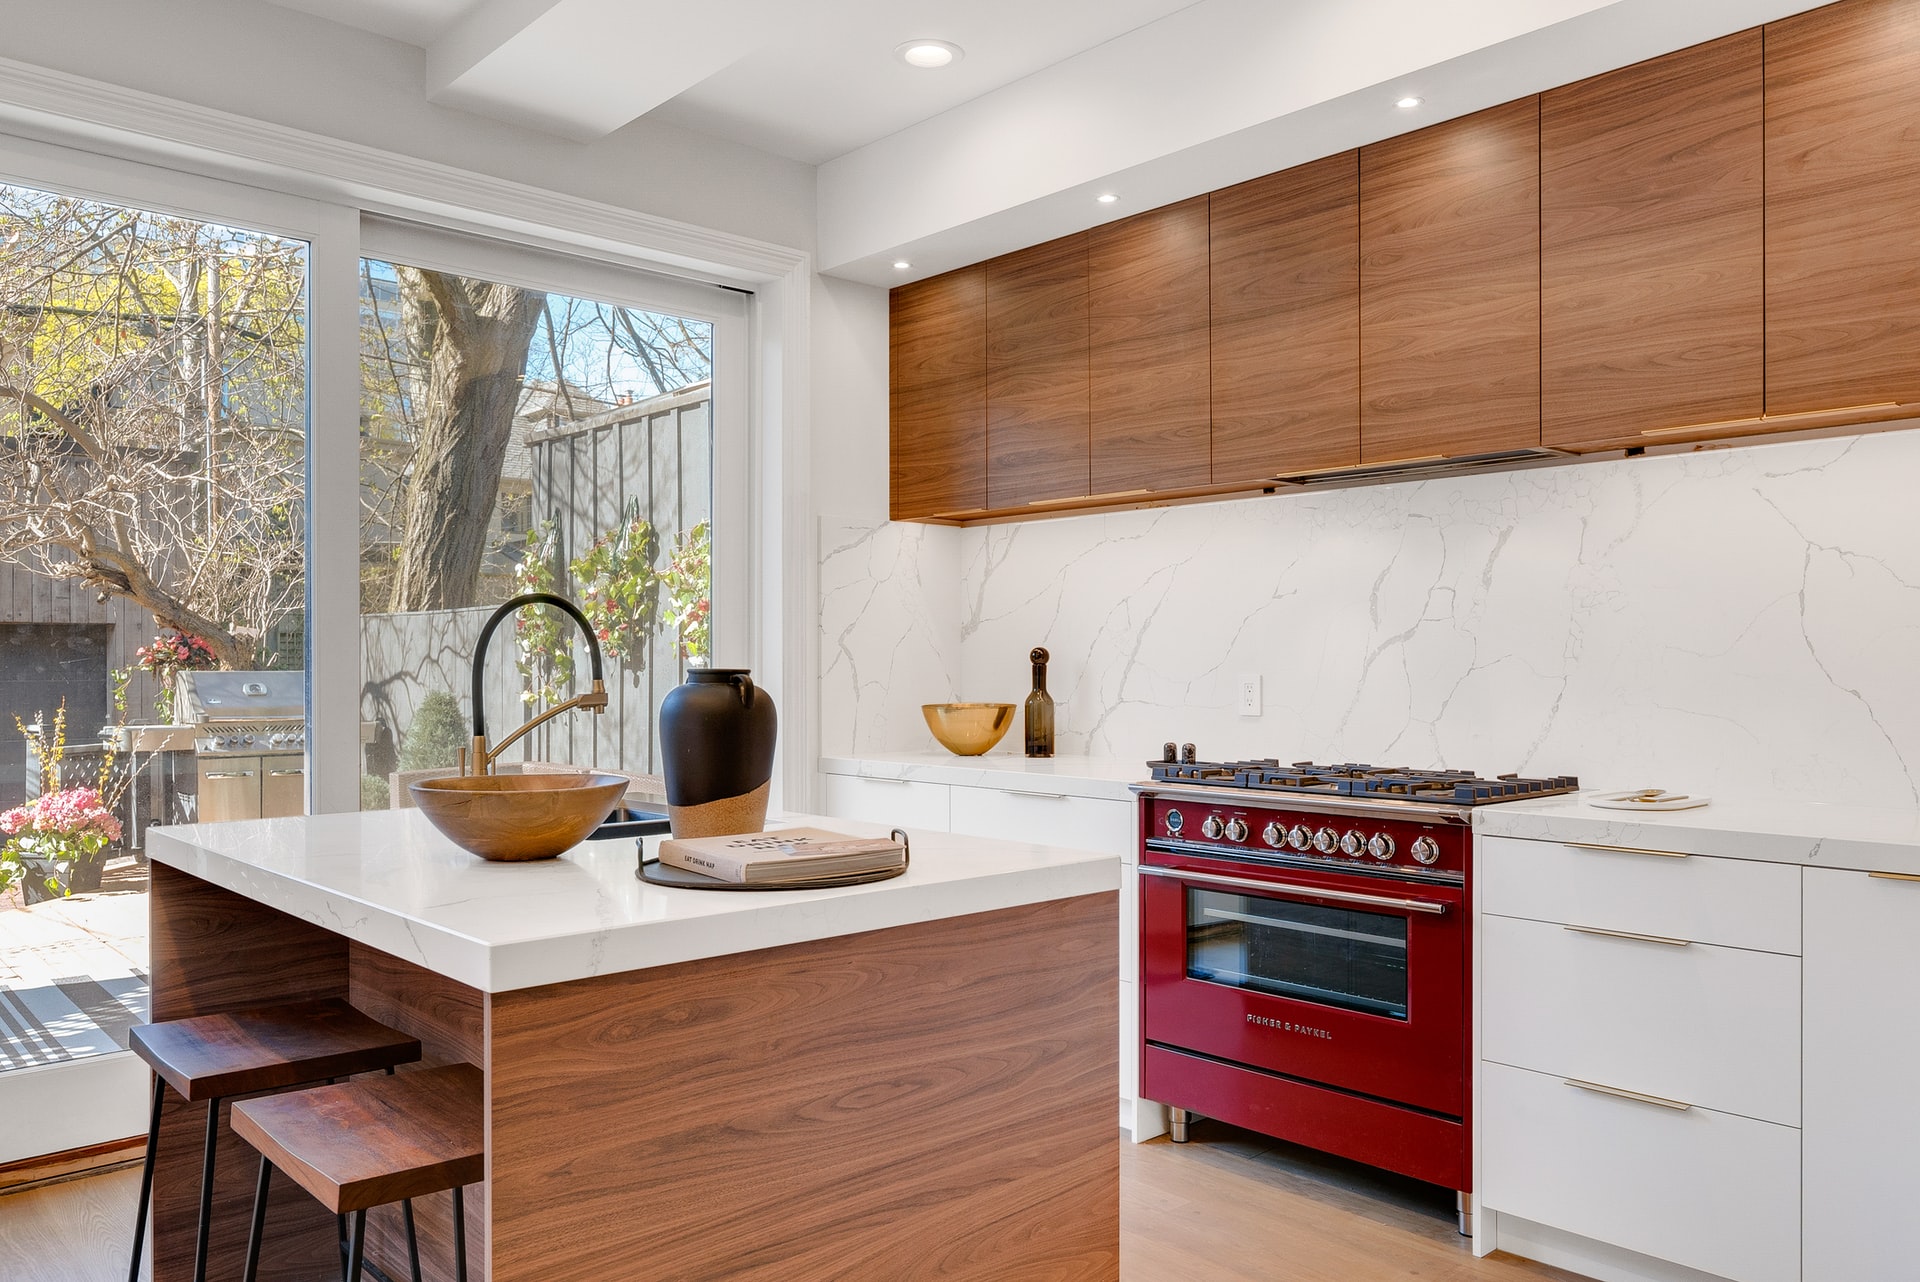 Top 8 Kitchen Design Styles: Which One Do You Like?